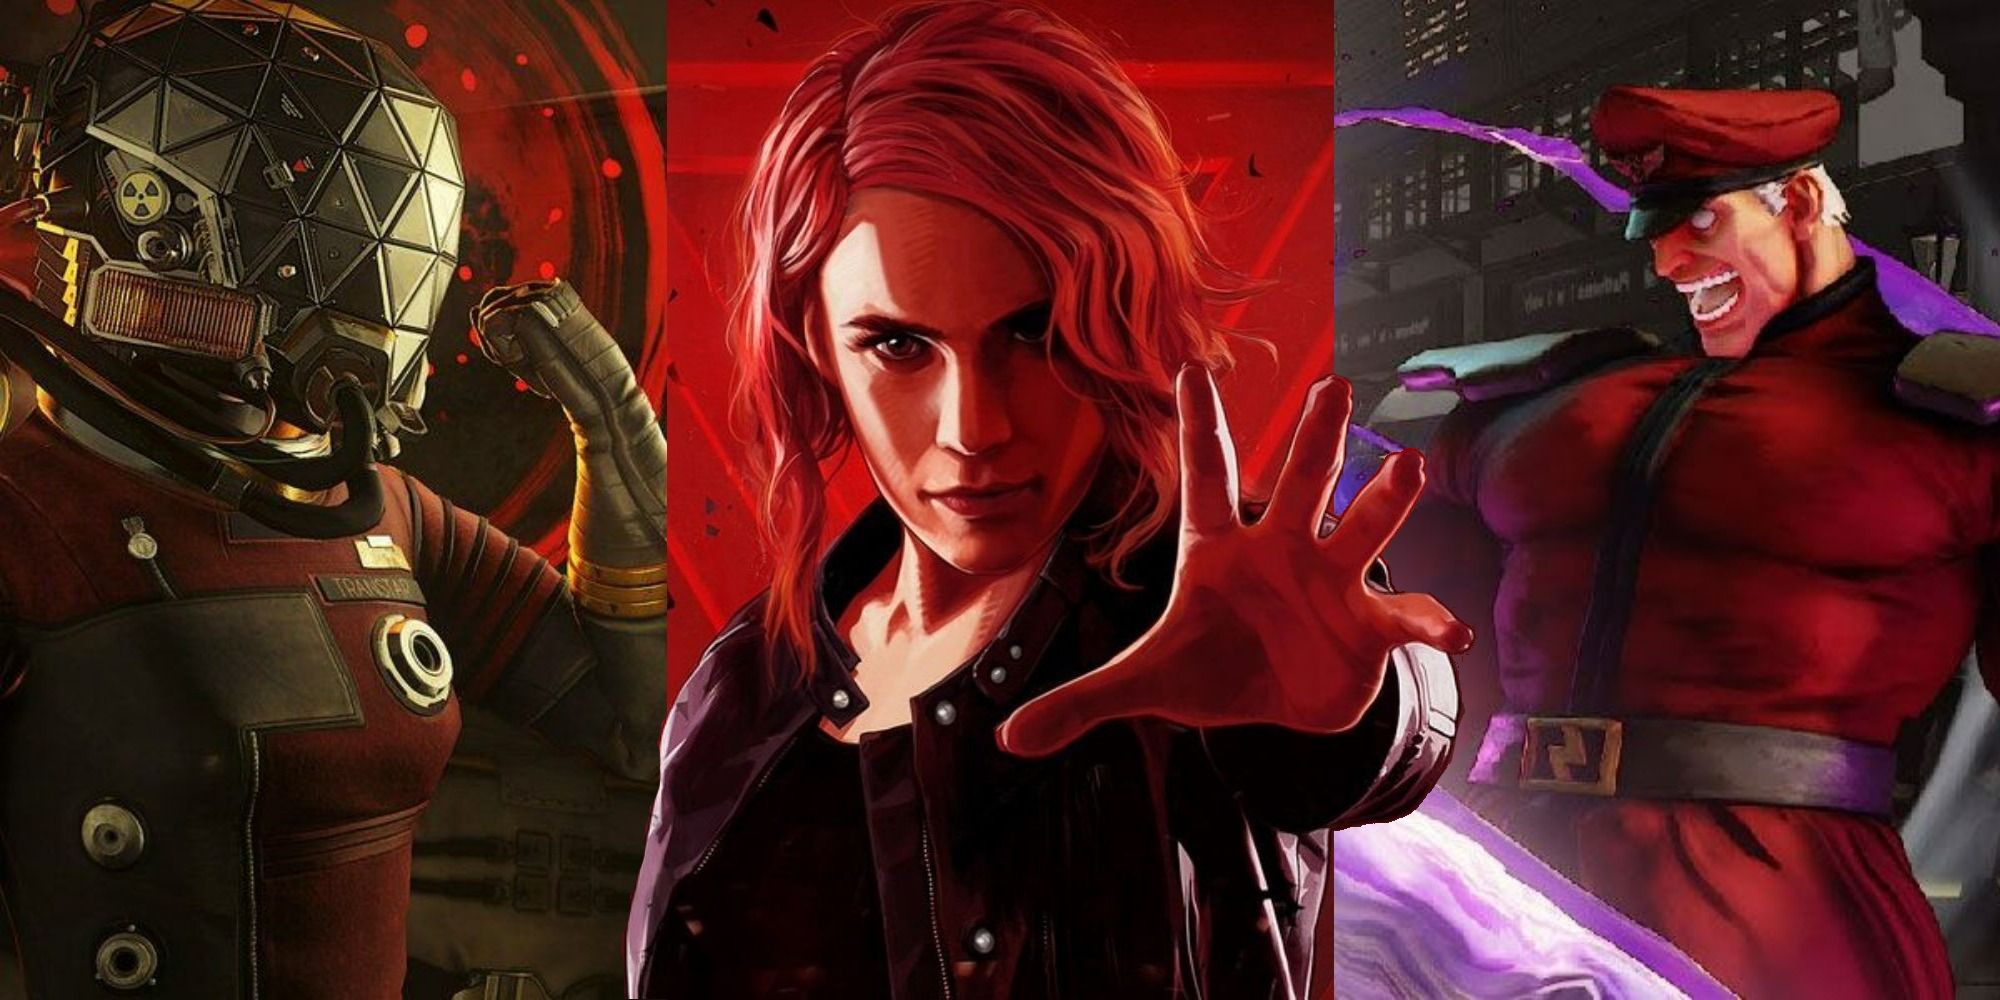 Psychic Powers Featured Image with Morgan from Prey, Jesse from Control, and M.Bison from Street Fighter